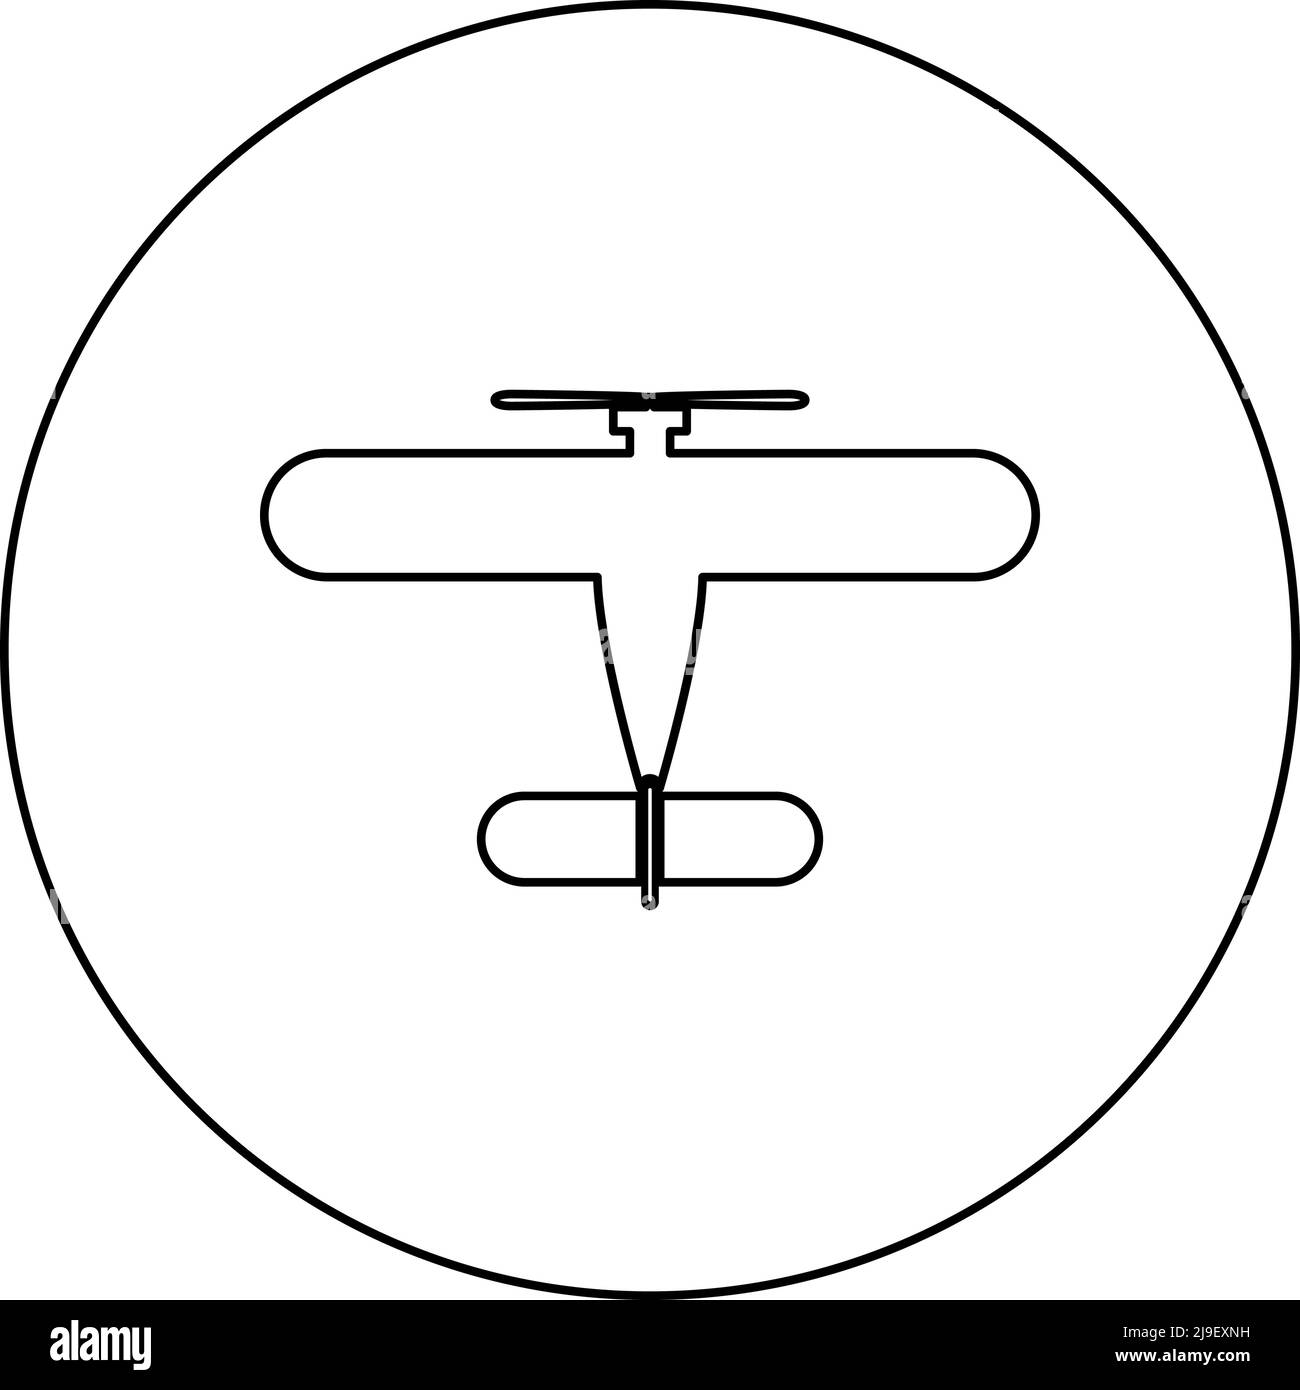 Propelier aircraft retro vintage small plane single engine icon in circle round black color vector illustration image outline contour line thin style Stock Vector